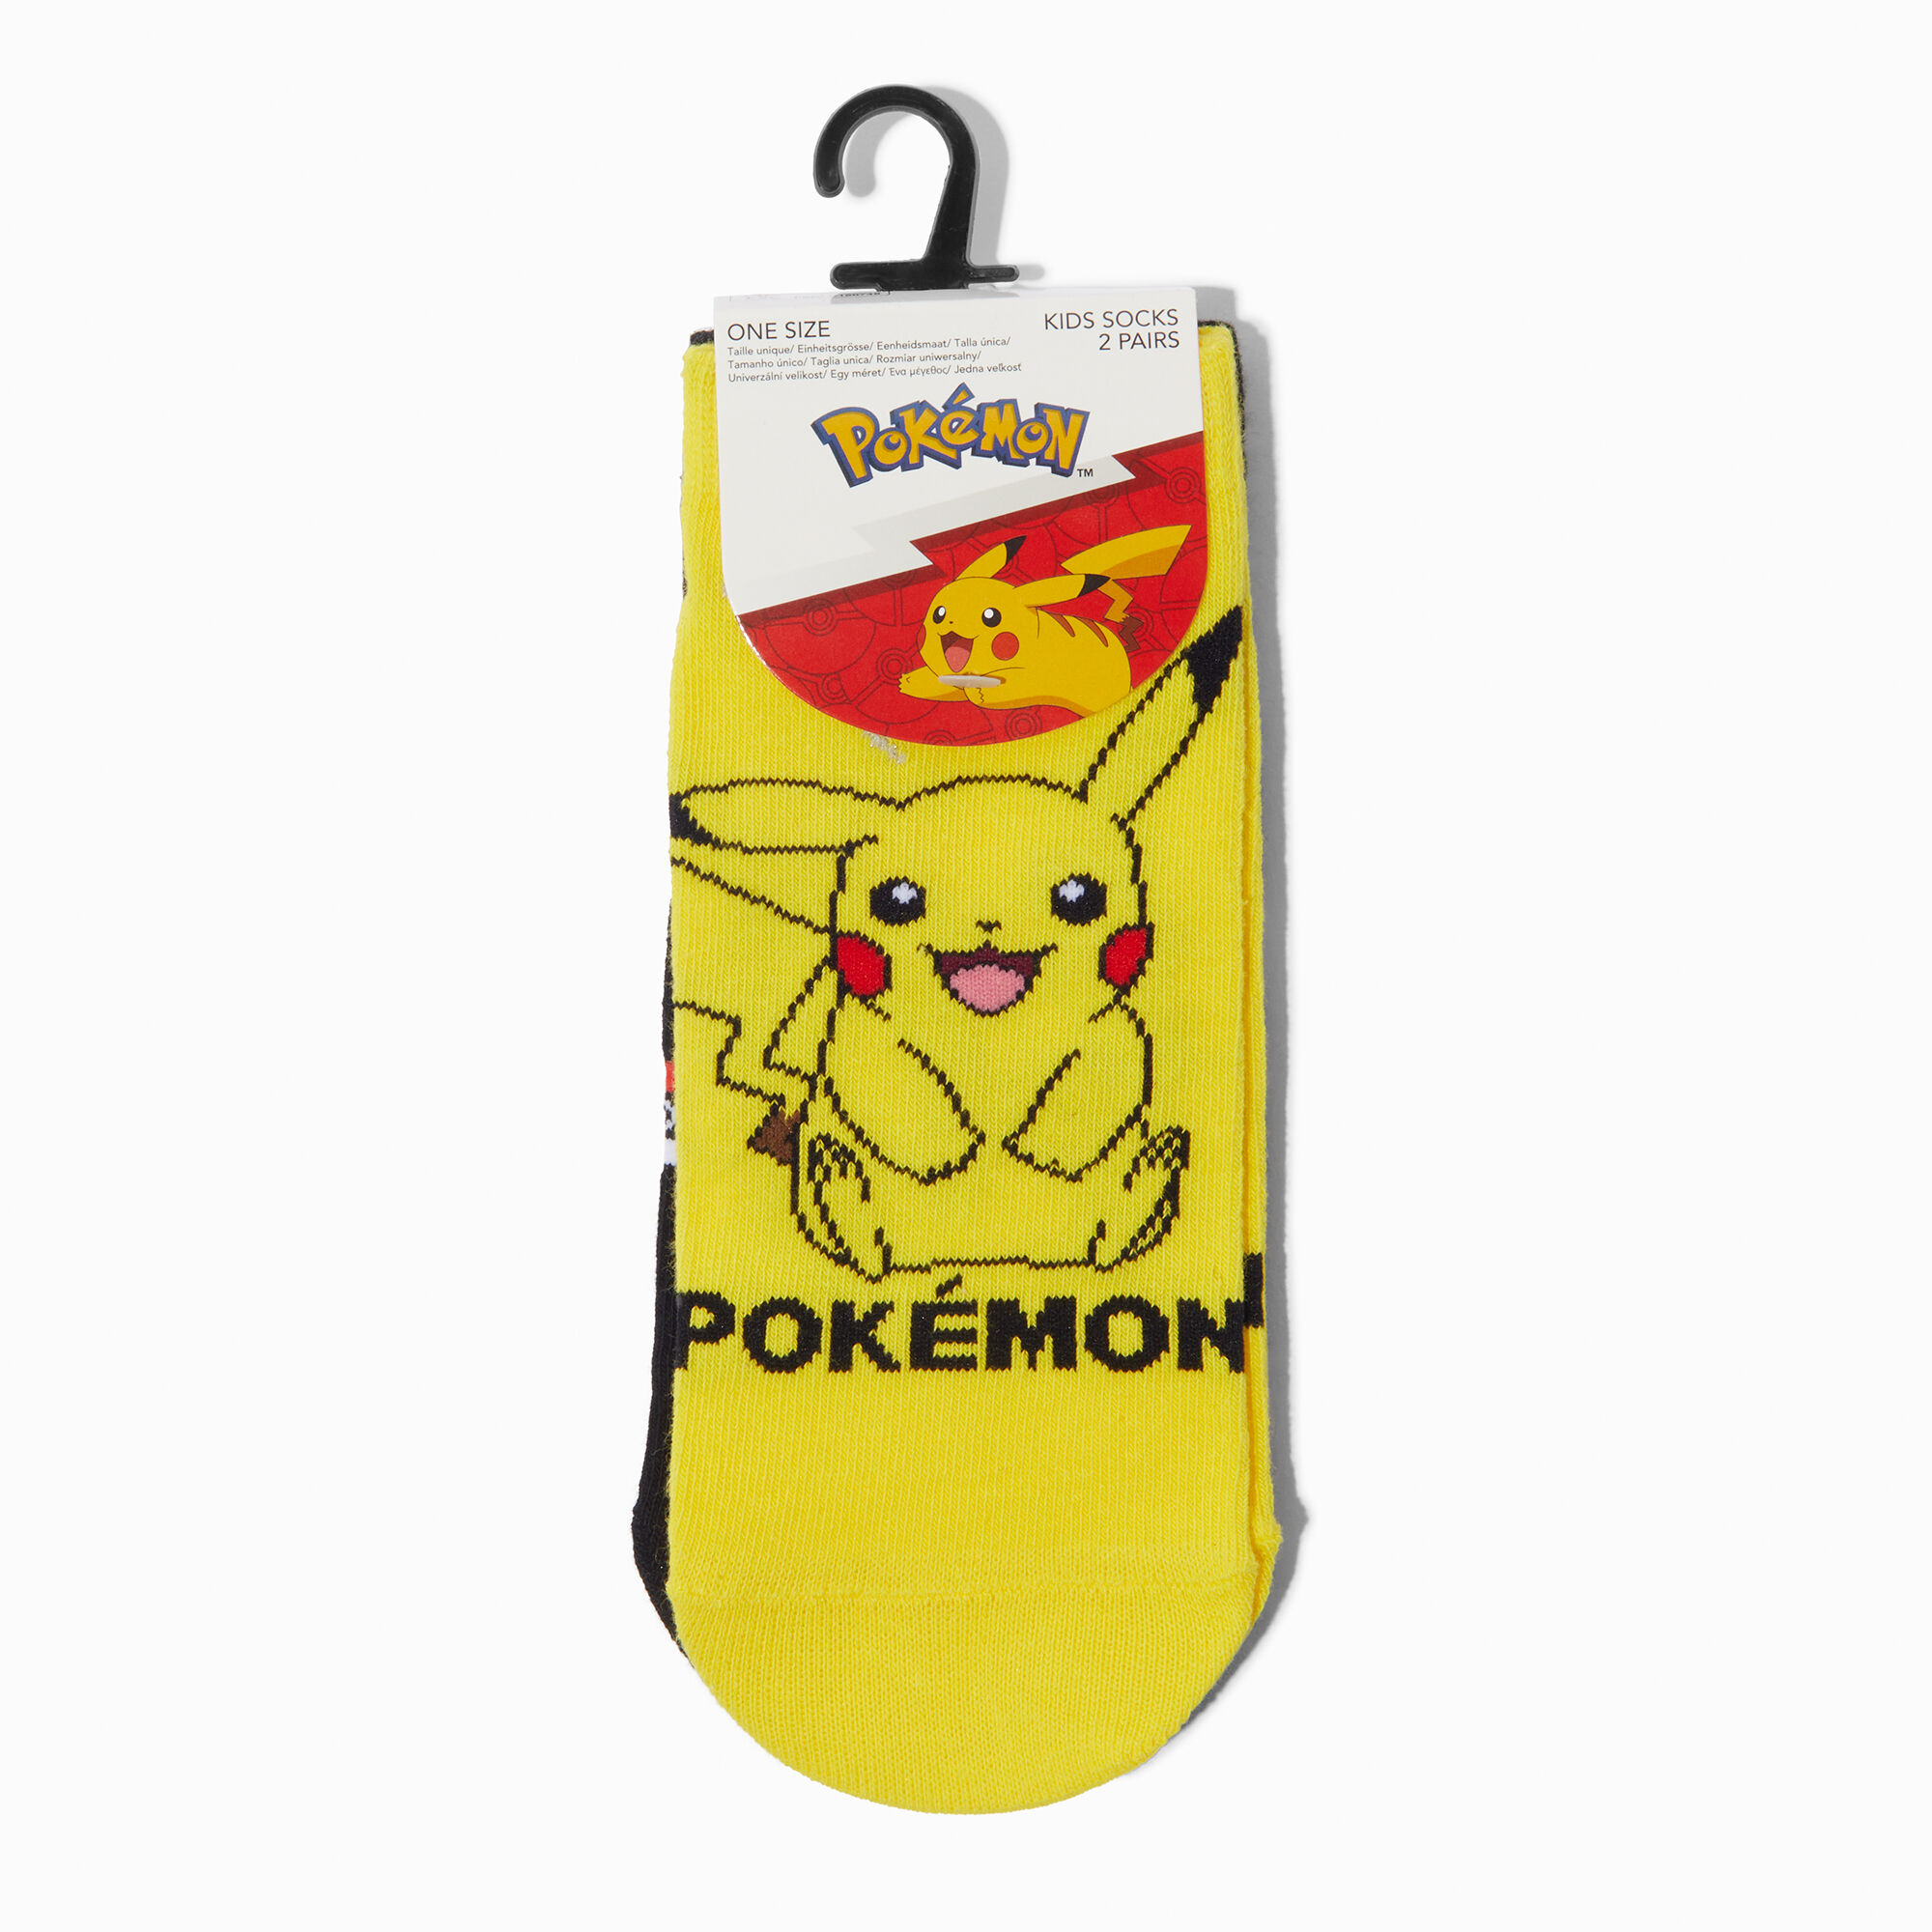 View Claires Pokémon Ankle Socks 2 Pack information